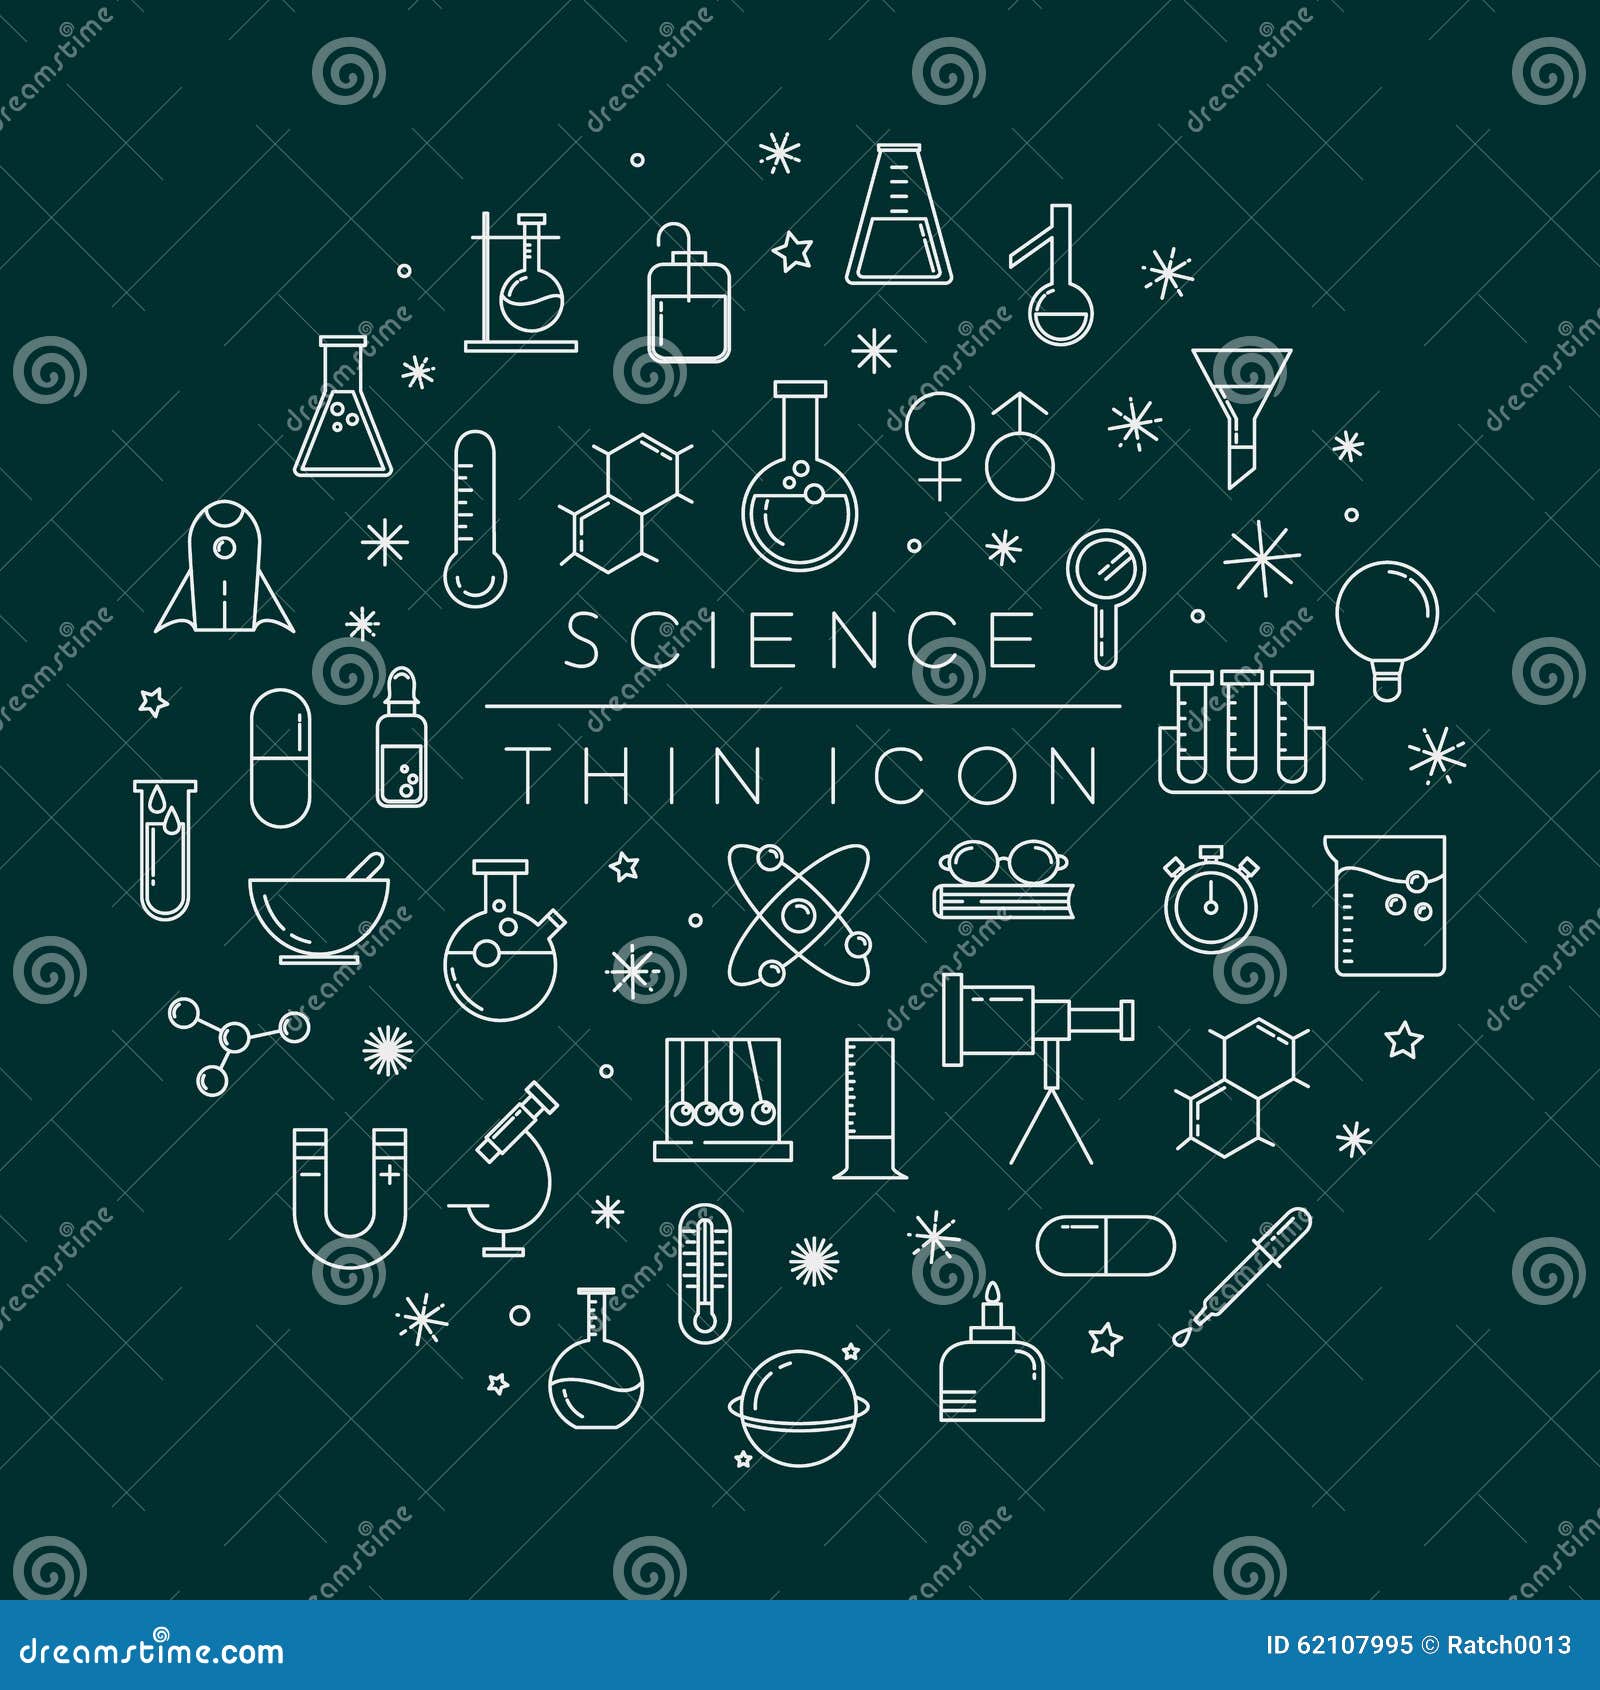 set of science icons